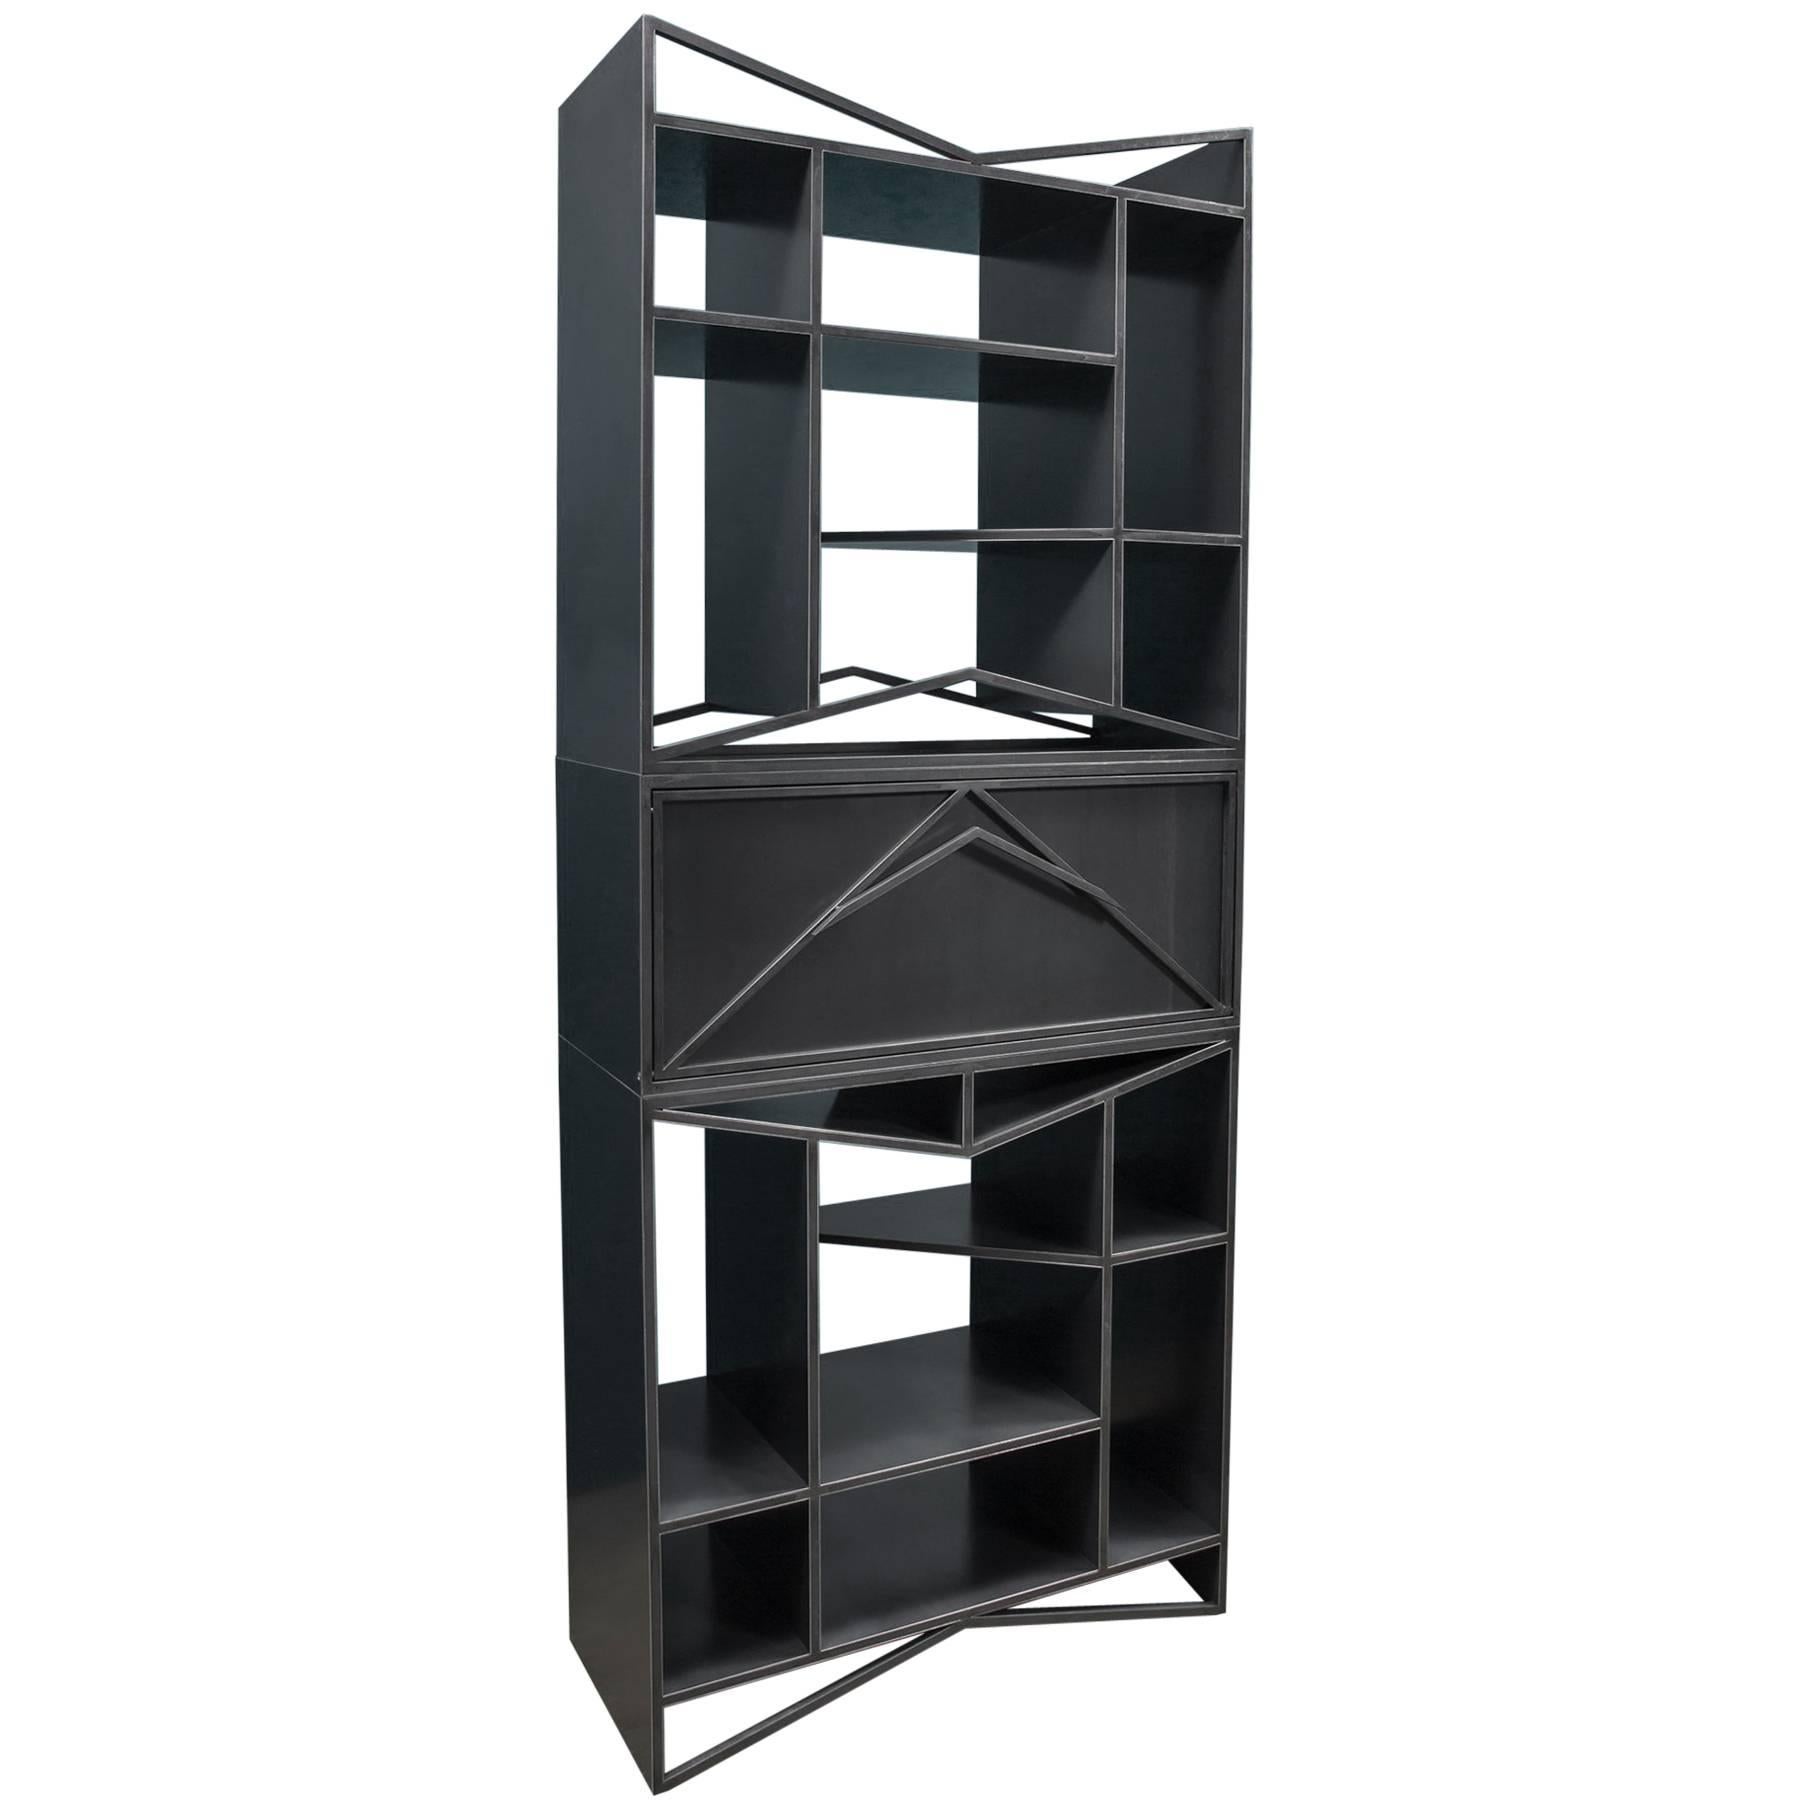 Meridian Modular Credenza, Trio, Vertical Steel Bookcase, by Force/Collide